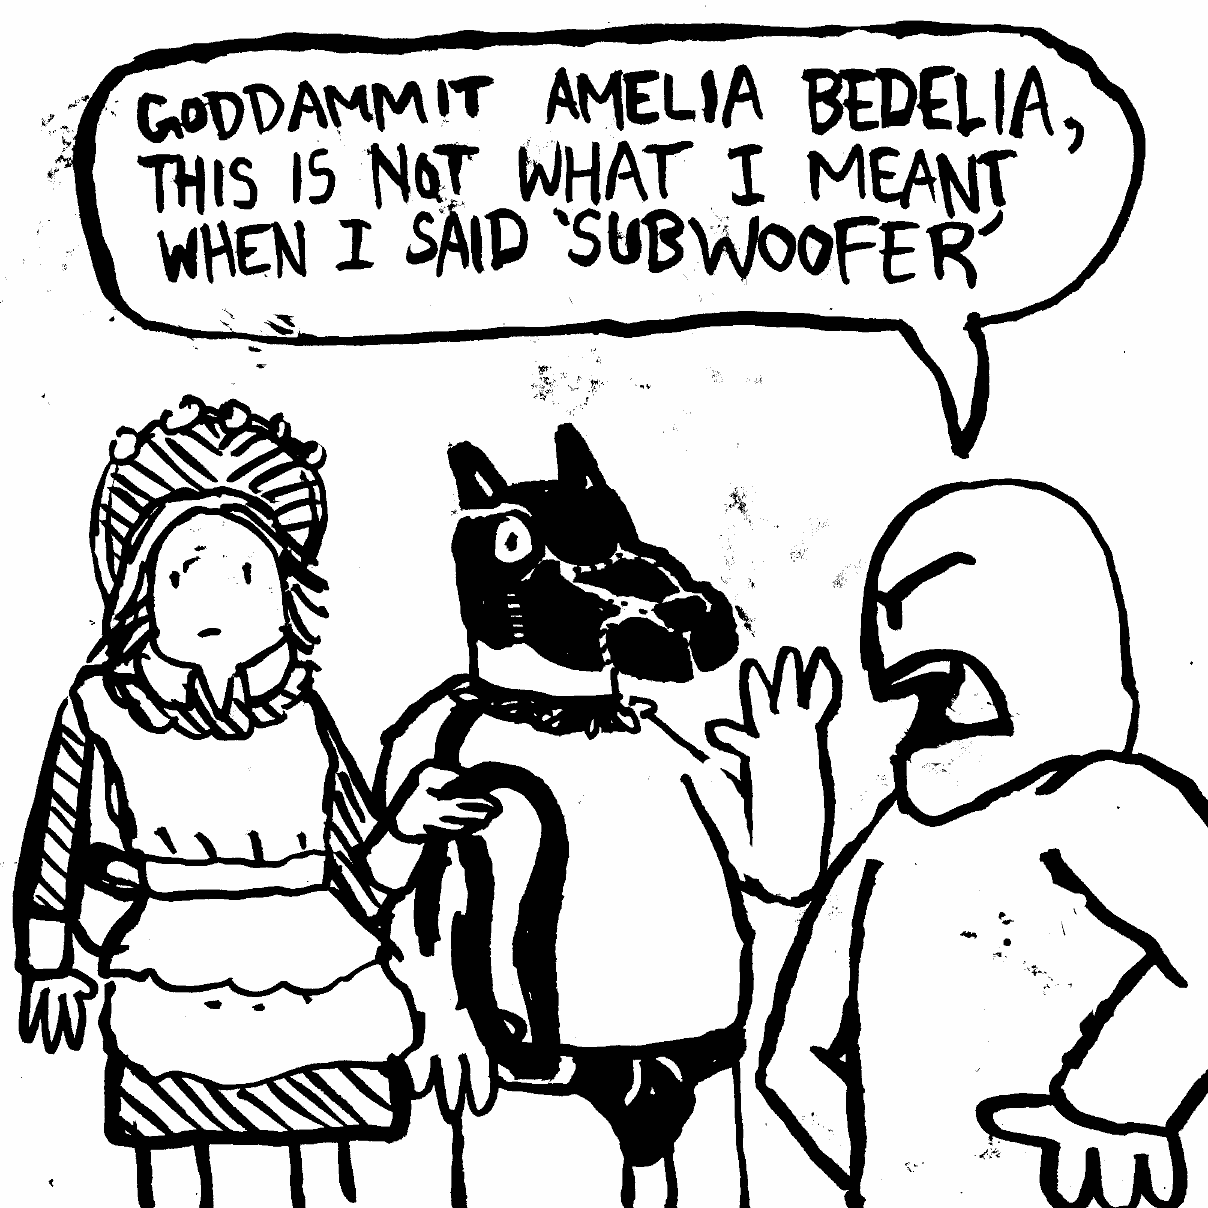 amelia bedelia pup play fetish submissive dammit this is not what I meant takes things too literal